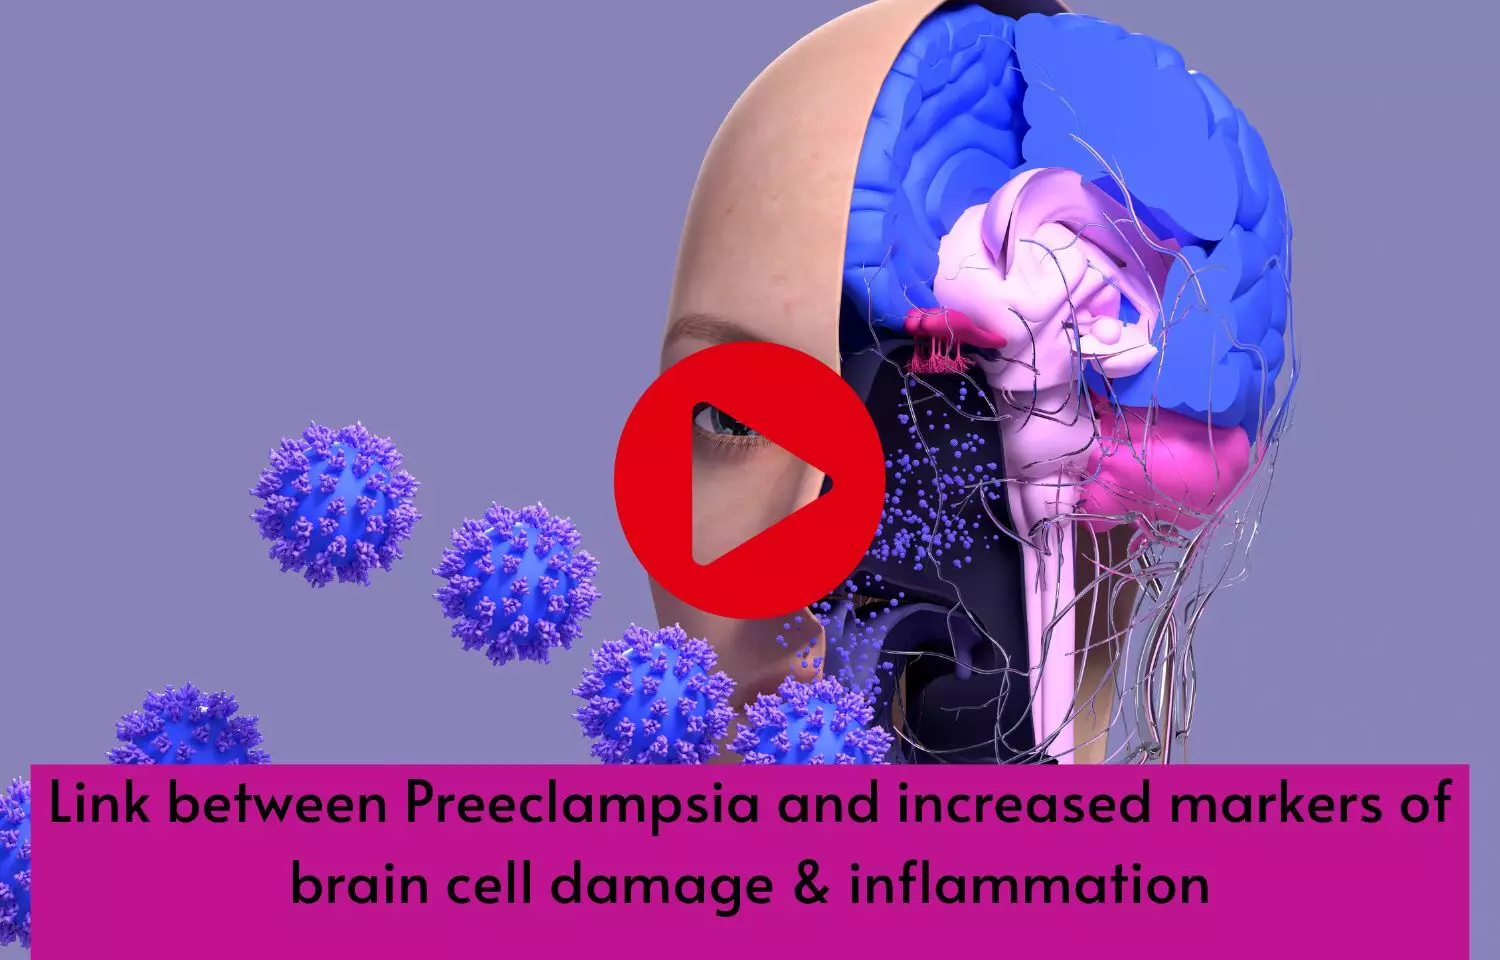 Link between Preeclampsia and increased markers of brain cell damage & inflammation